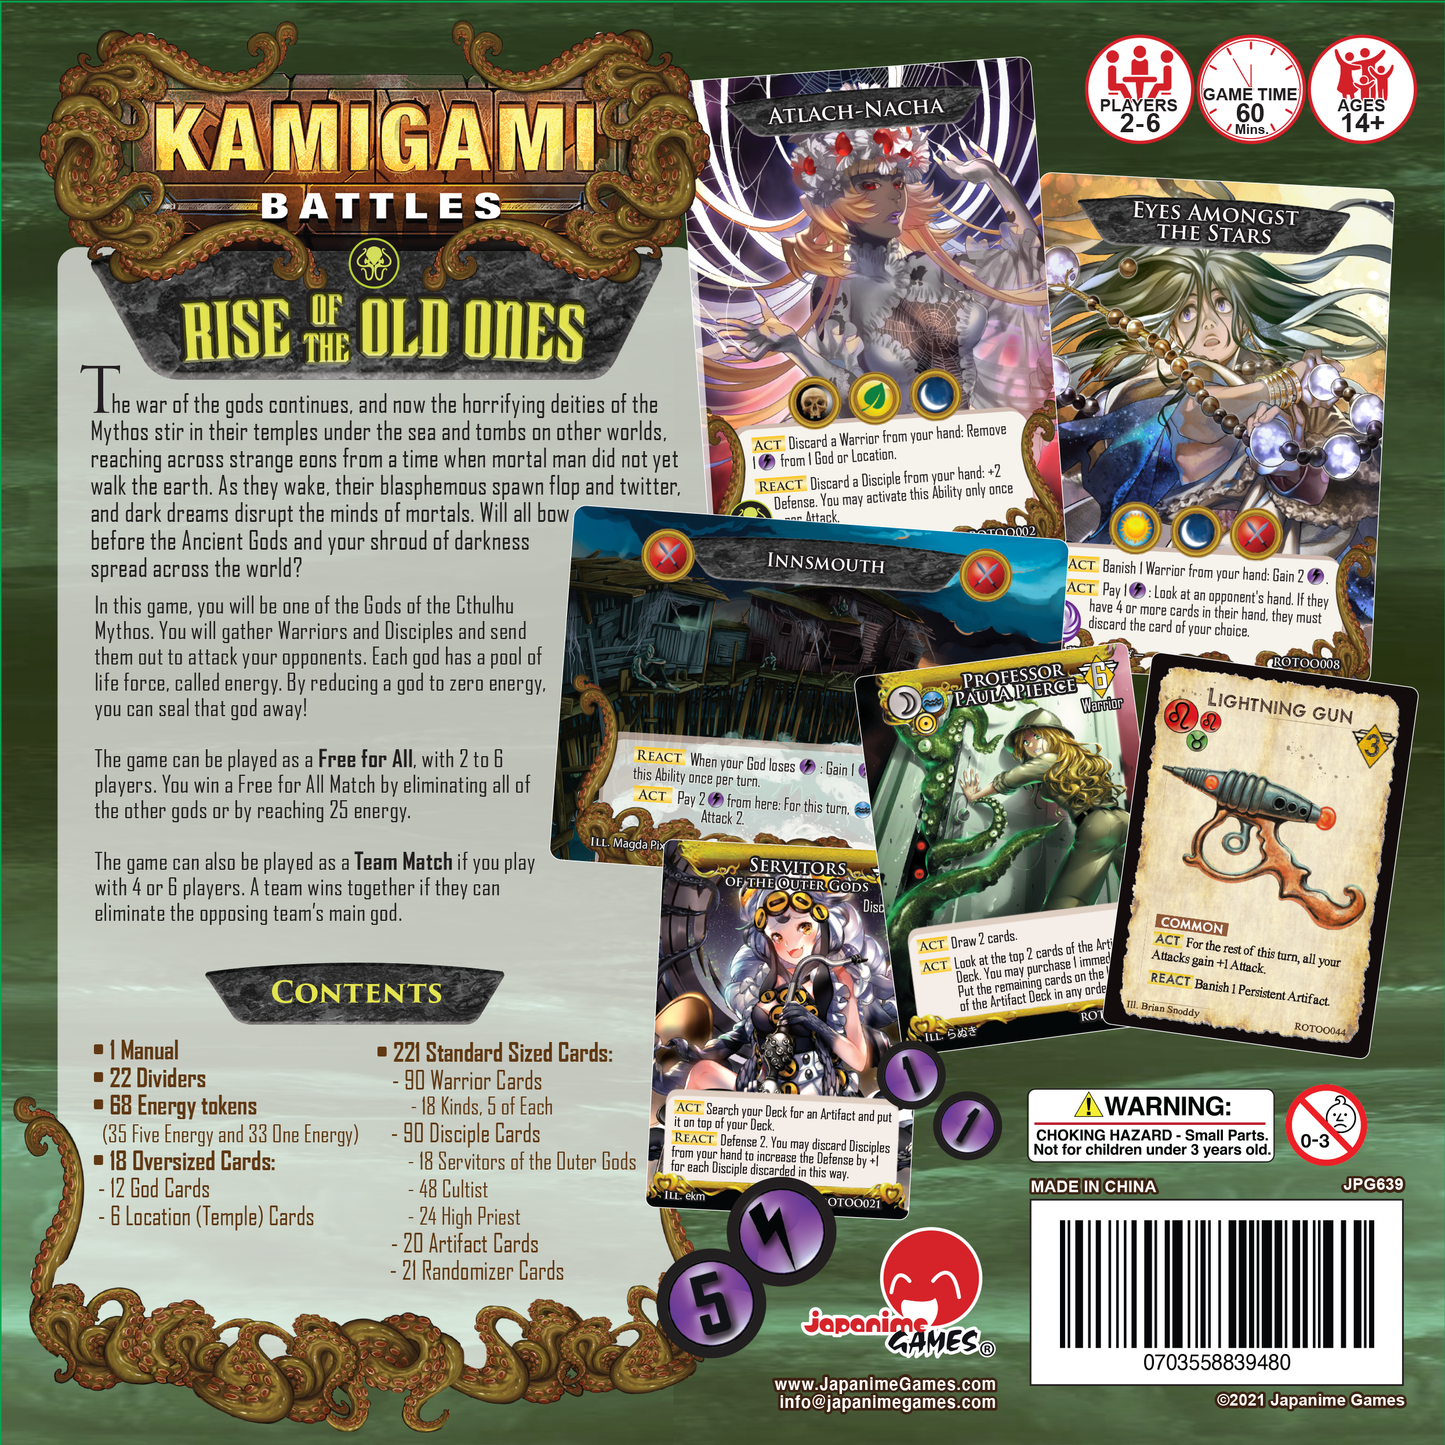 Kamgami Battles: Rise of the Old Ones